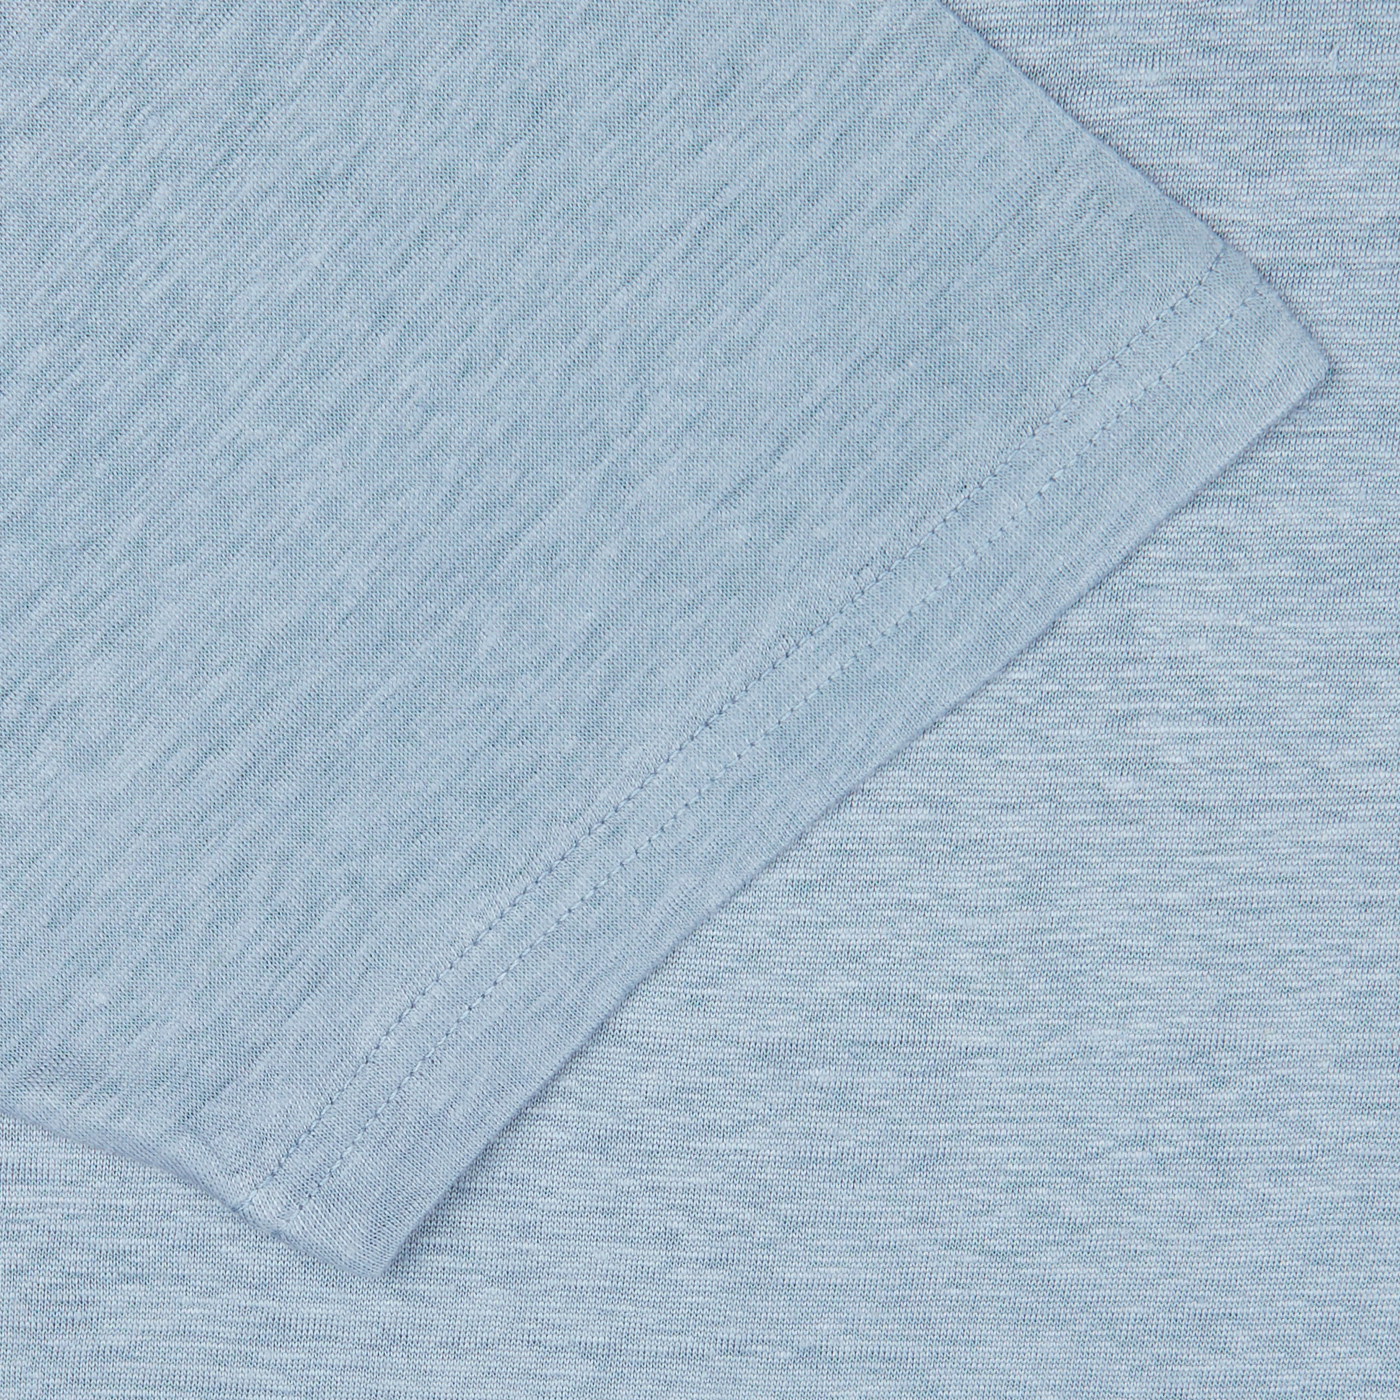 Close-up of a Smoke Blue Linen Jersey Oversized T-shirt from De Bonne Facture with visible weave patterns and a folded edge.